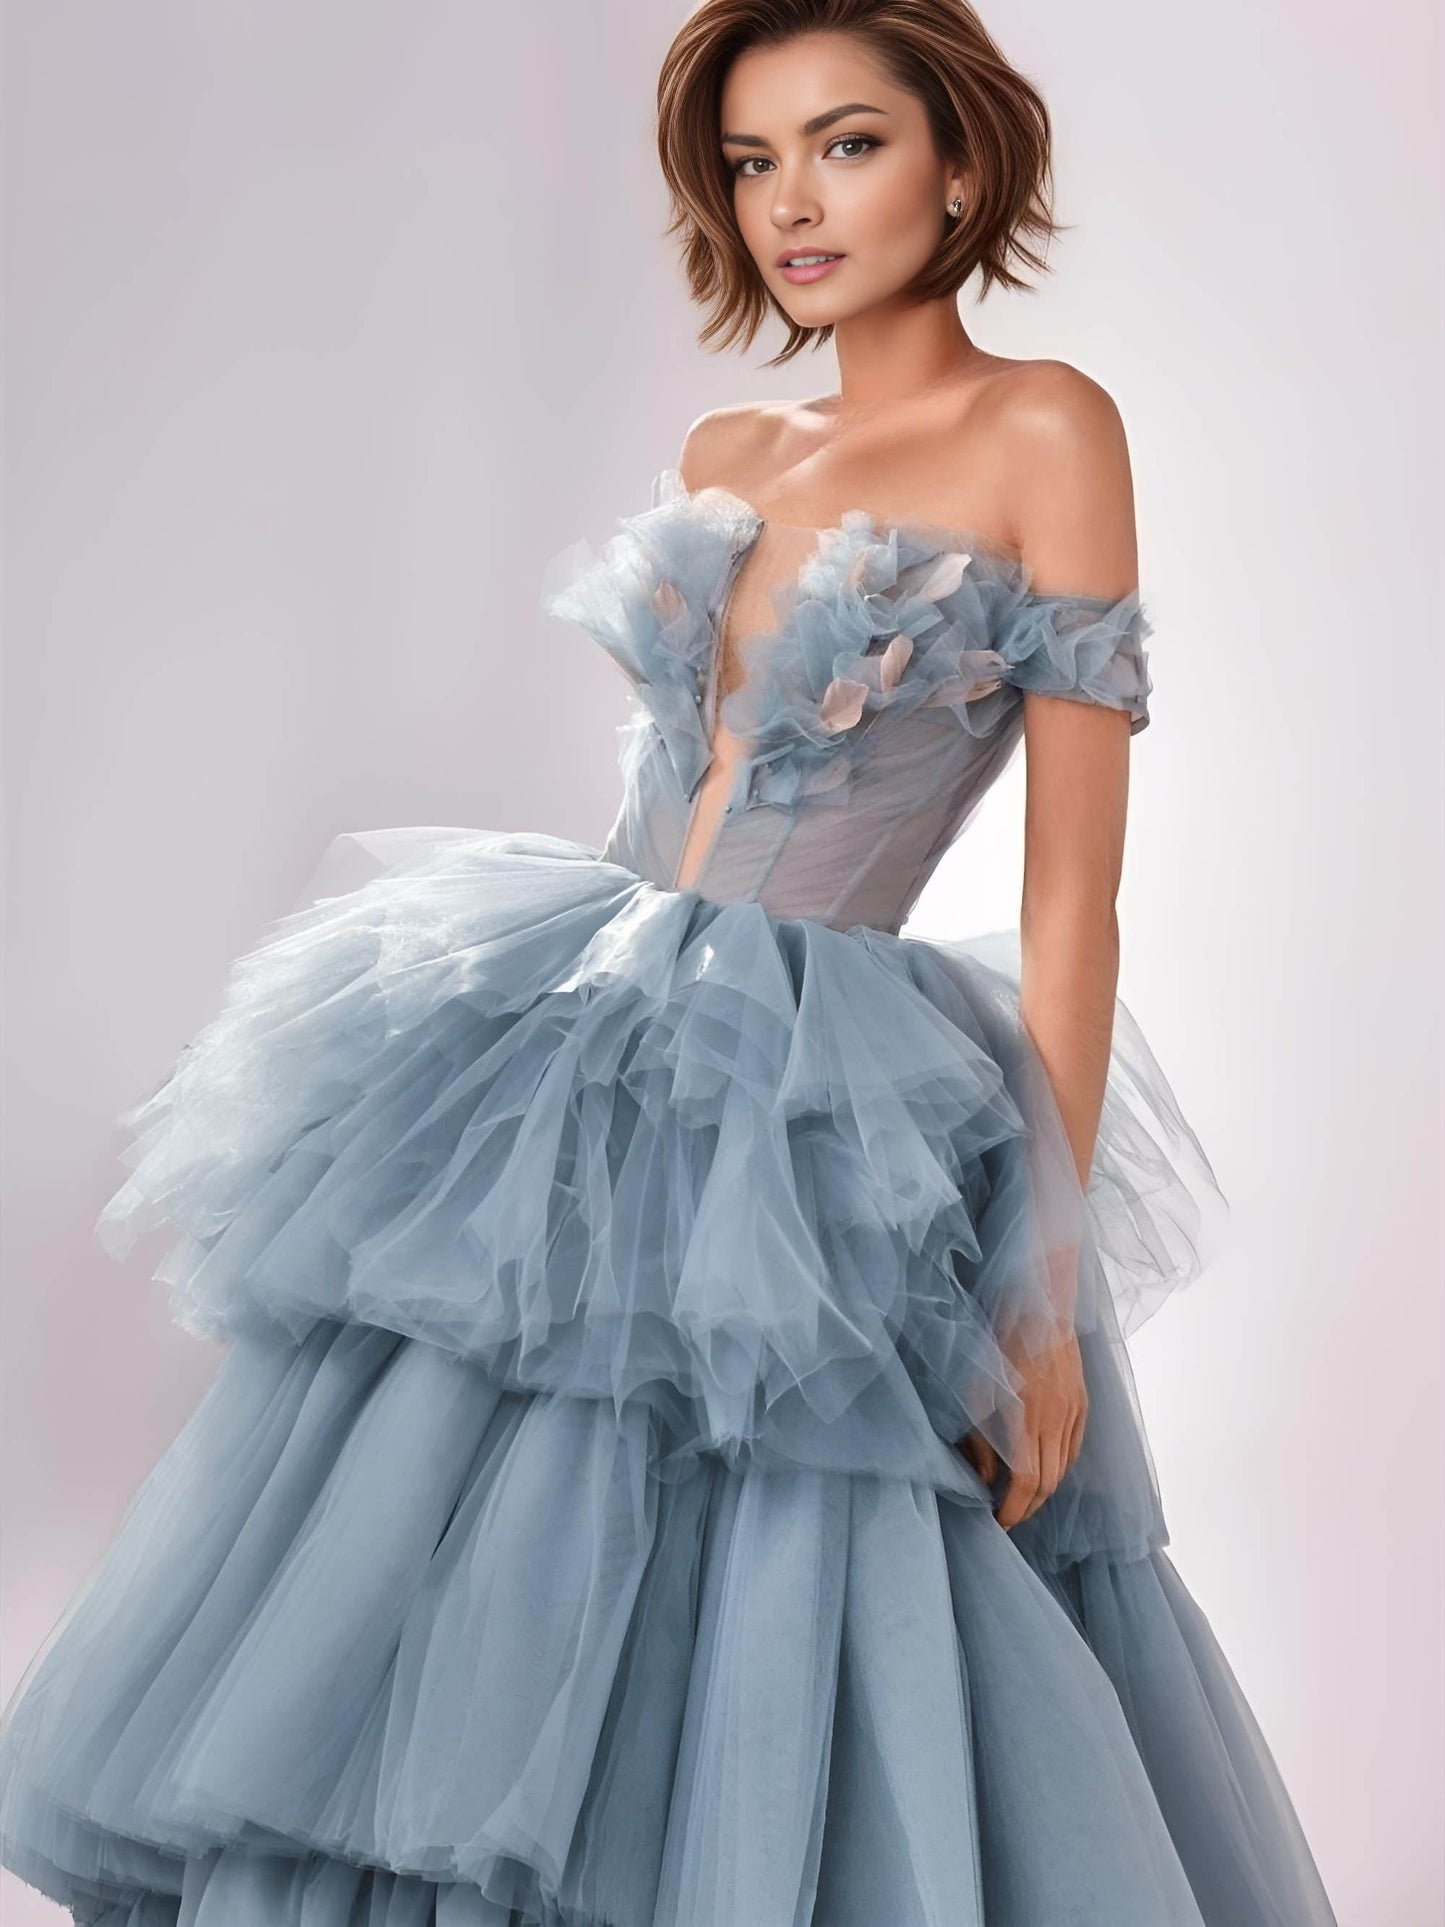 Woman wearing tiered blue tulle formal dress with interesting pink accent neckline